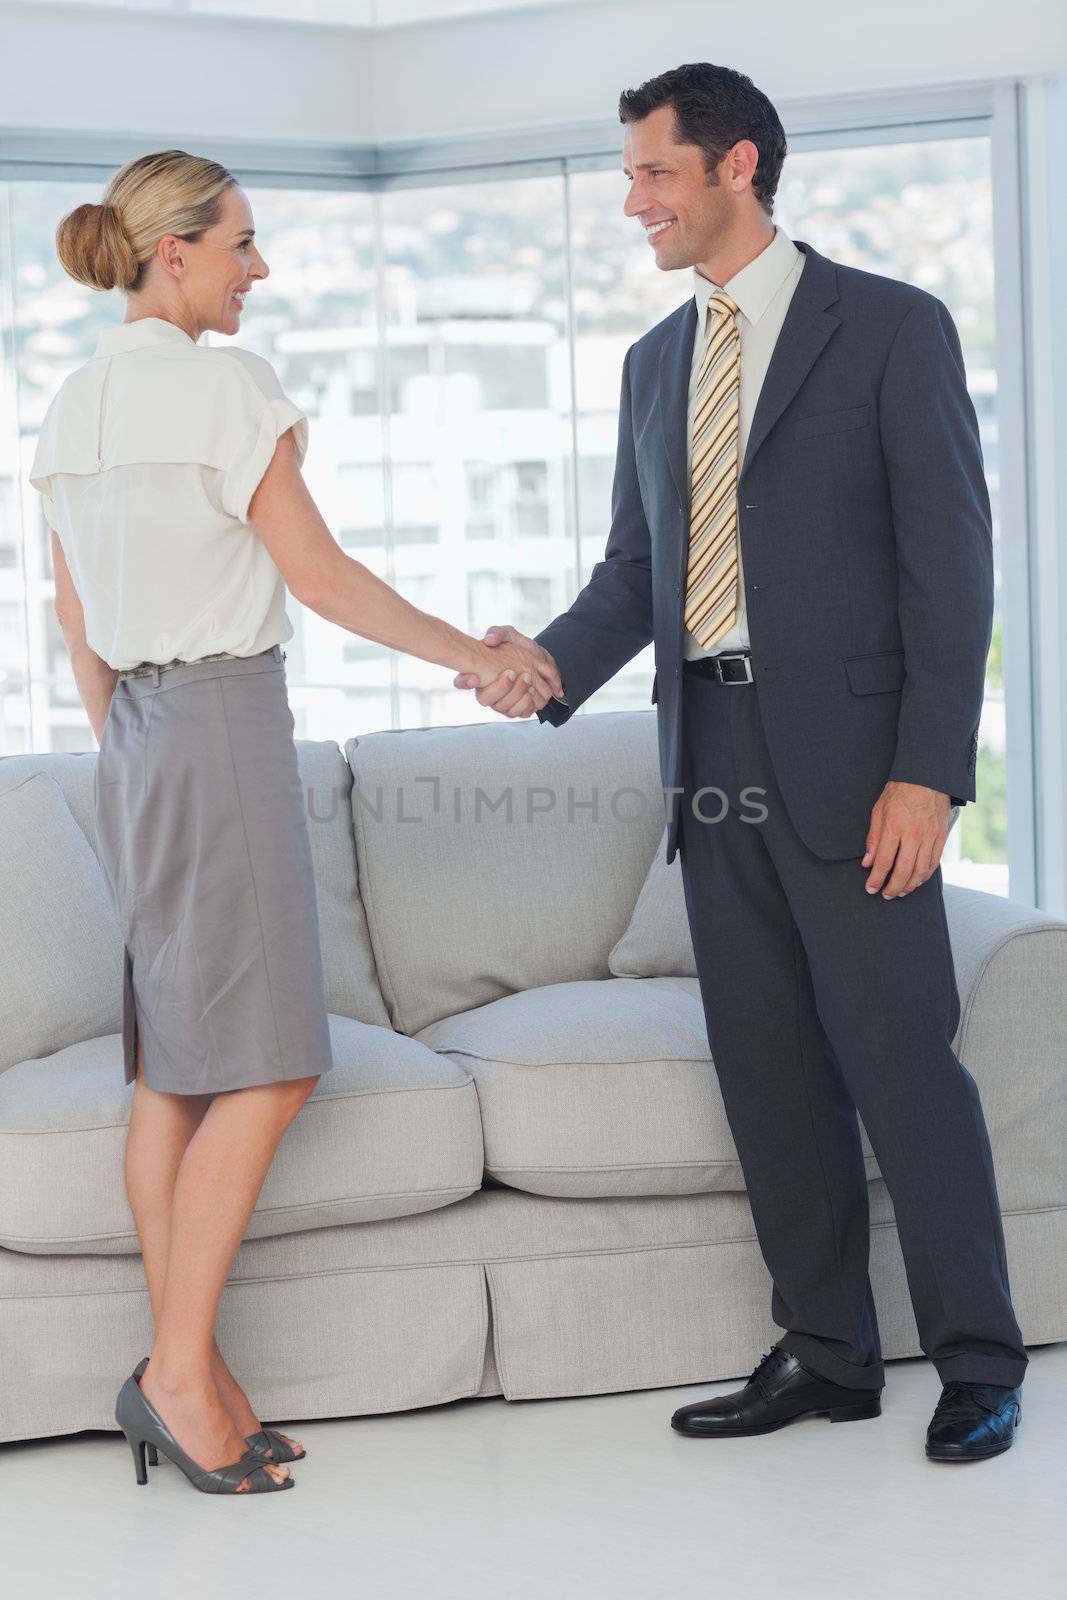 Cheerful business people shaking hands in bright office